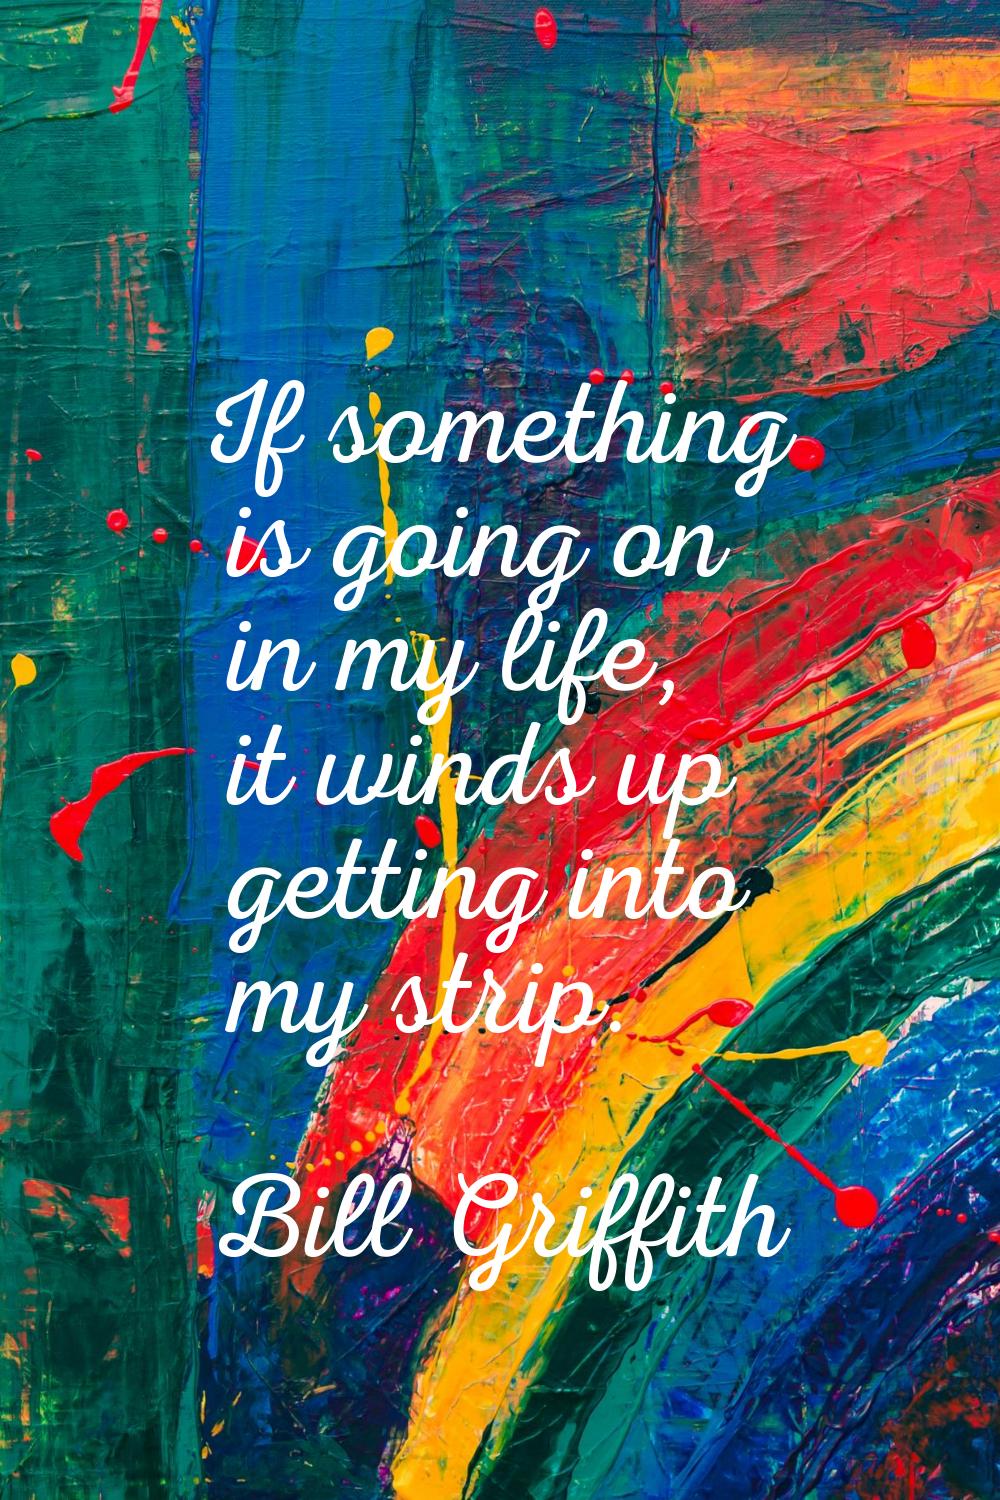 If something is going on in my life, it winds up getting into my strip.